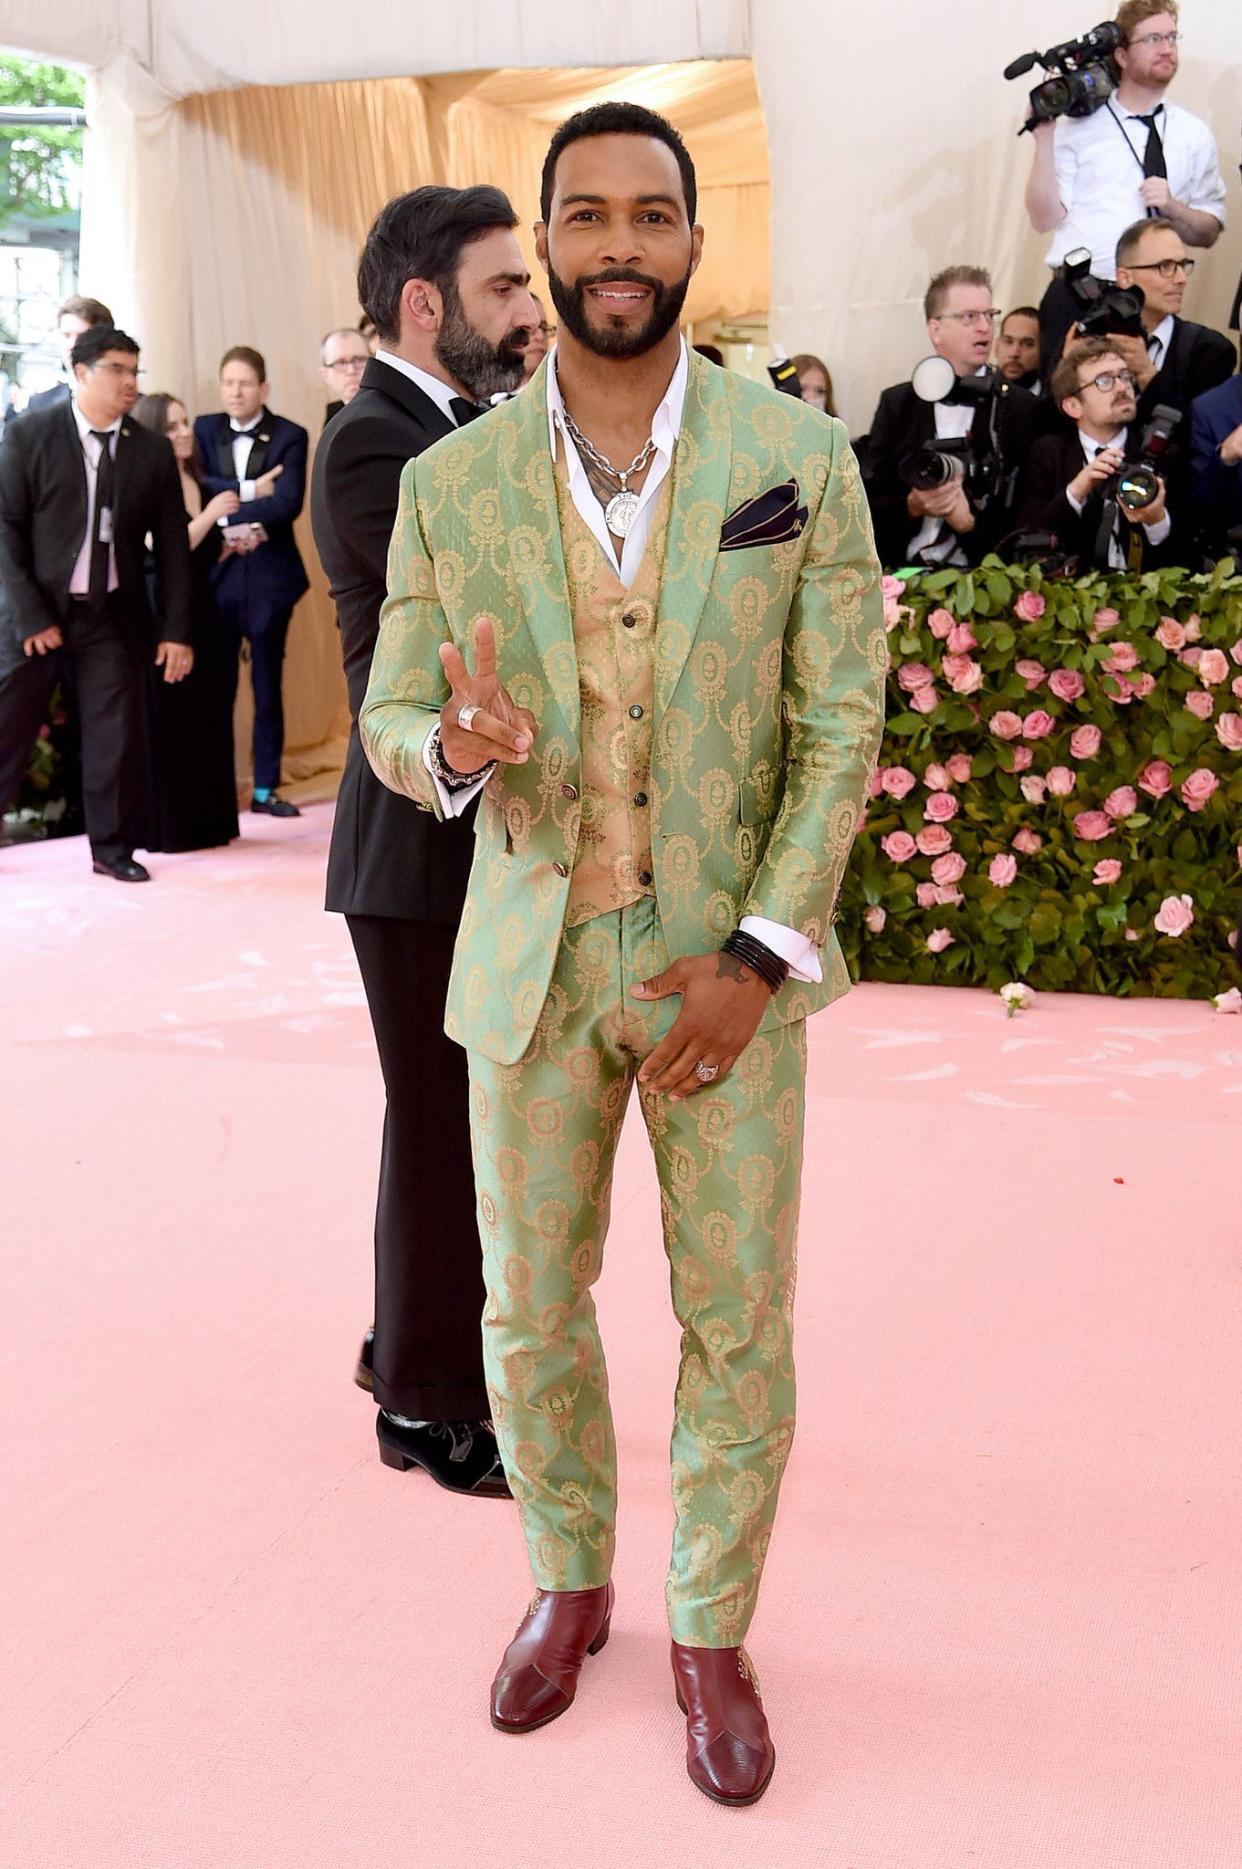 Omari Hardwick attends The 2019 Met Gala Celebrating Camp: Notes on Fashion at Metropolitan Museum of Art on May 06, 2019 in New York City.